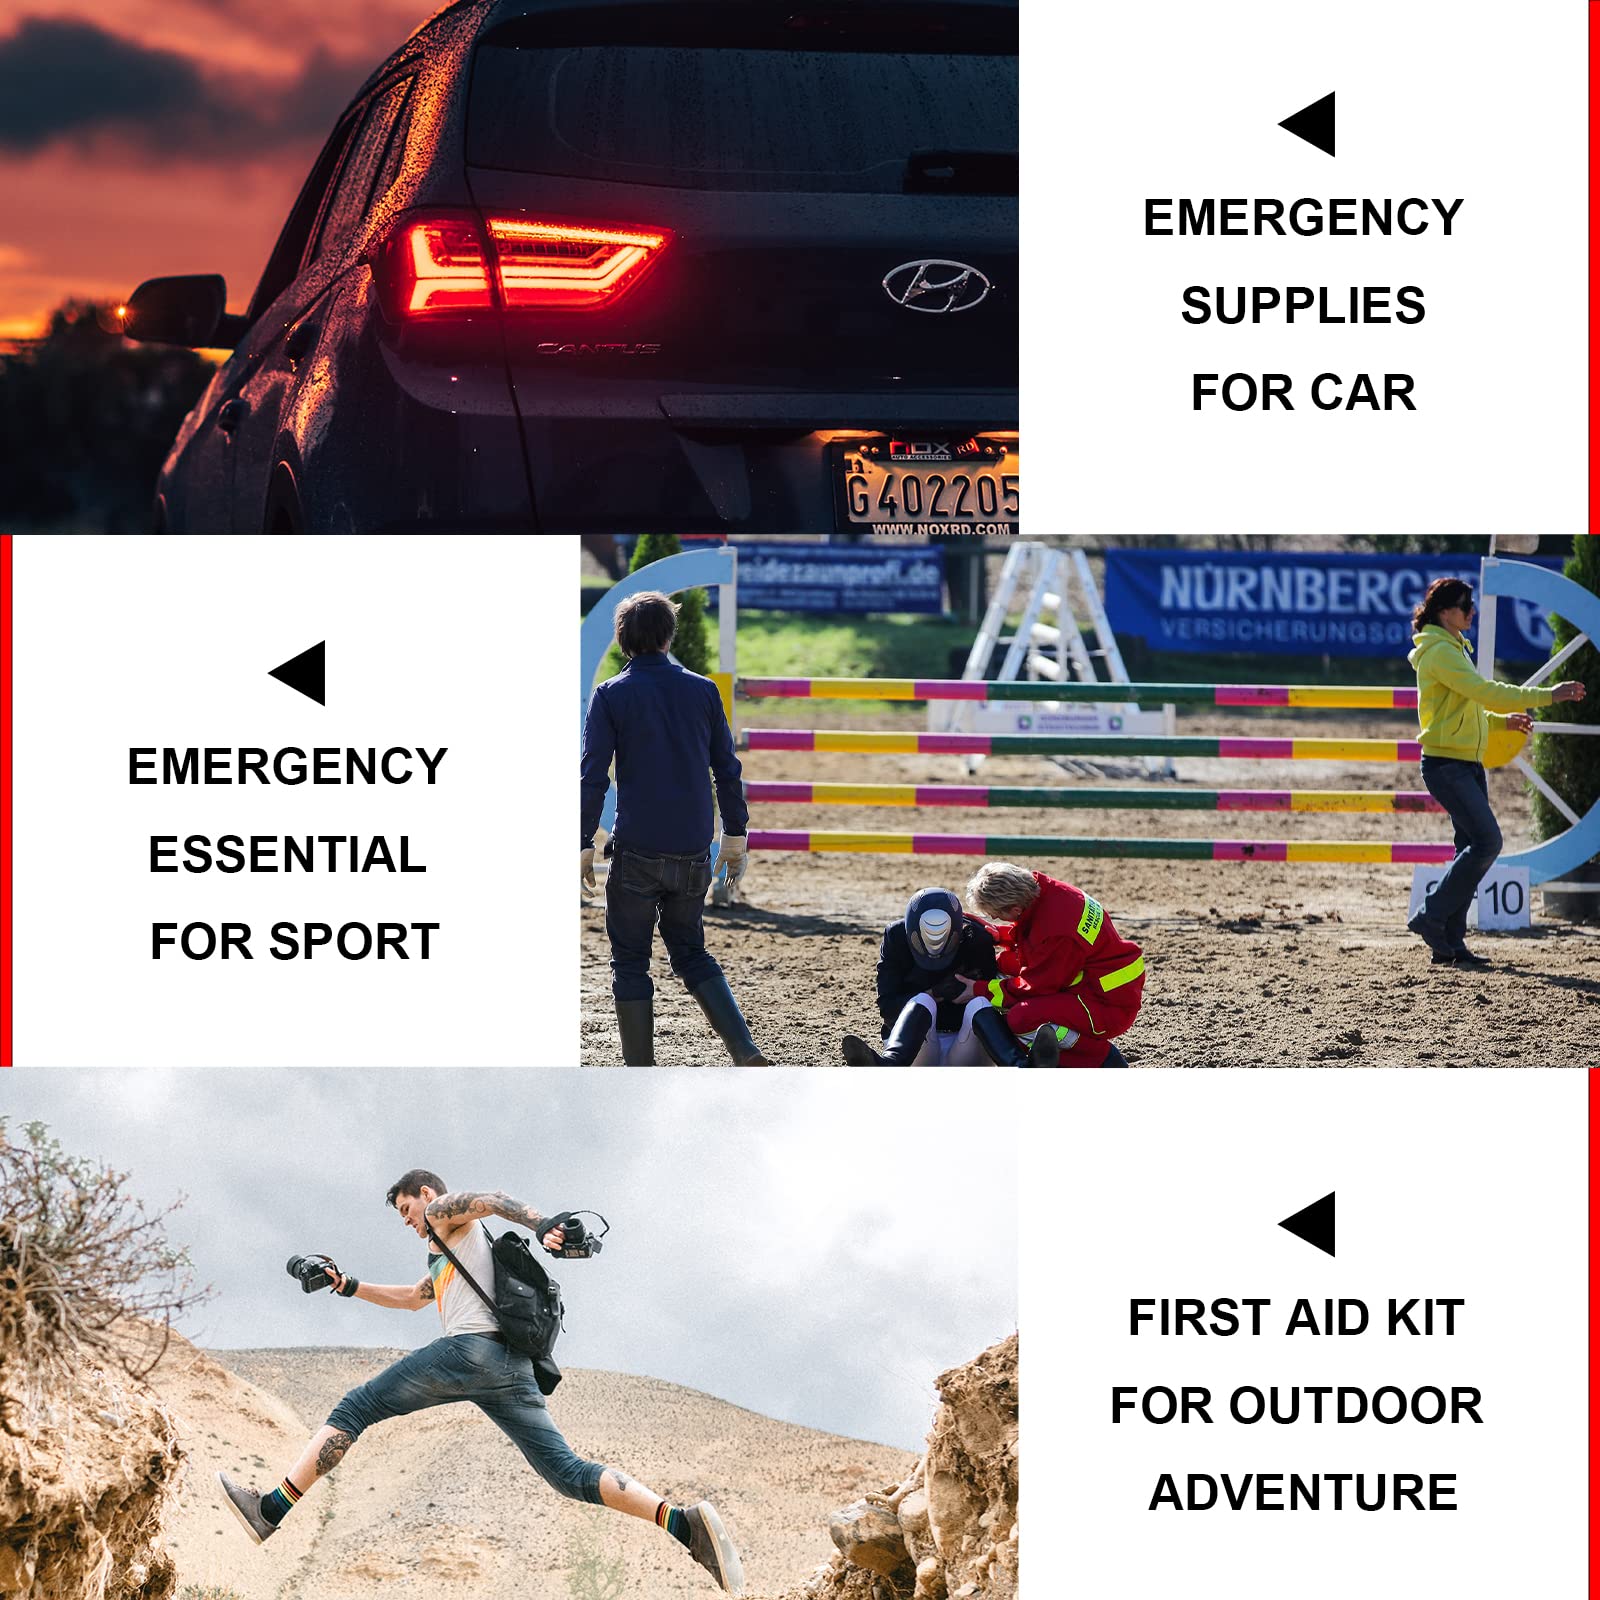 300 PCS Compact First Aid Kits Car Emergency First Aid Supplies for Business Travel Survival Gear and Equipment Home First Aid Kit Essentials for Car Outdoor Adventure, Red 1st Aid